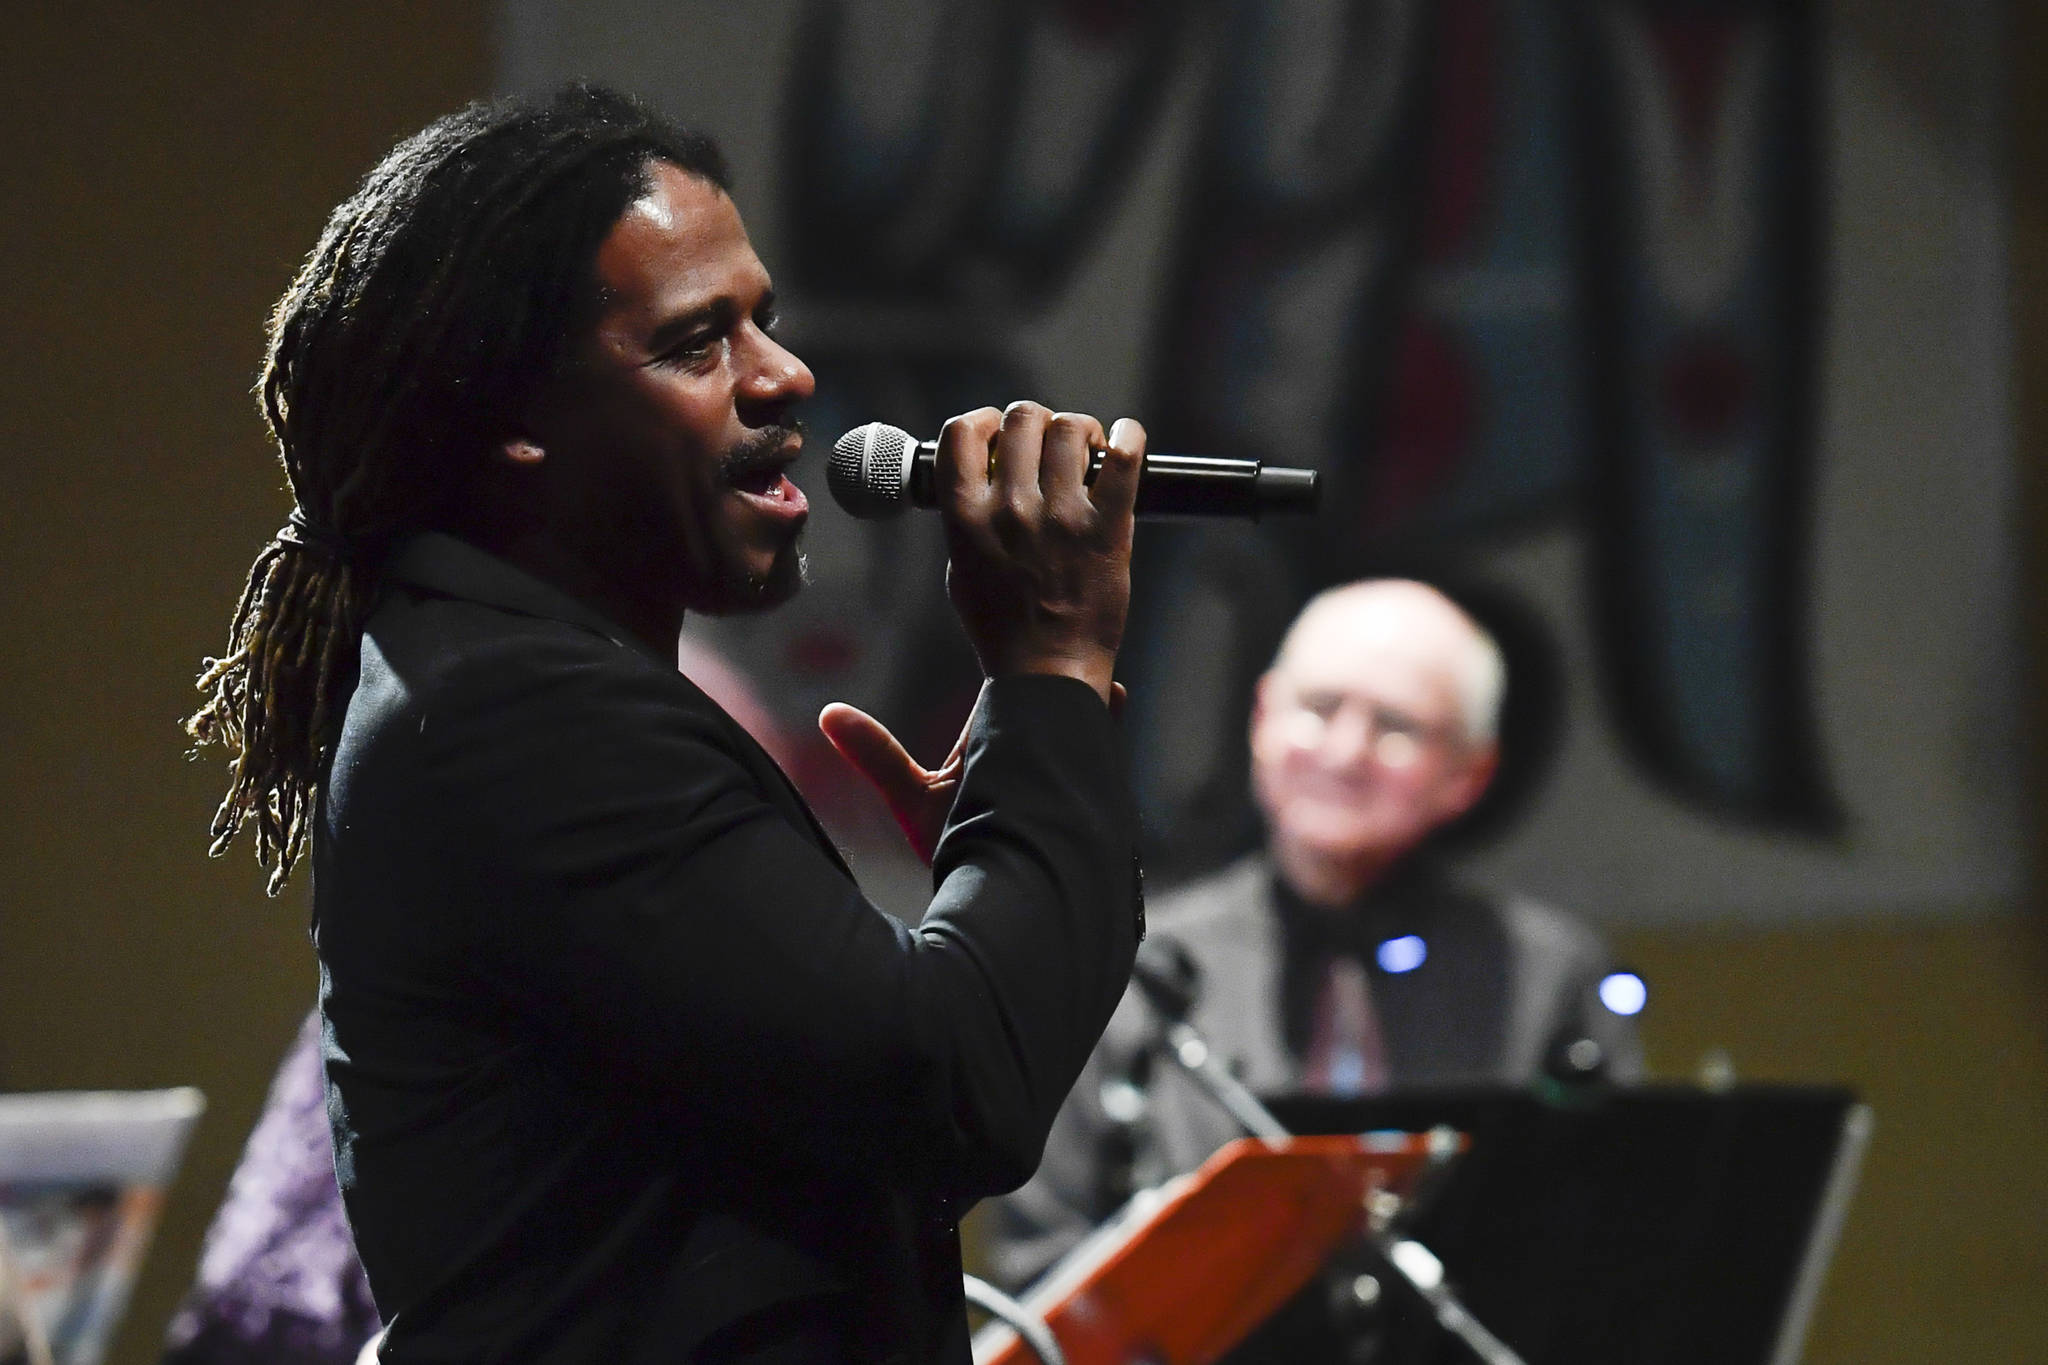 Ryan Shaw sings during the performance of “Motown for Our Town” at the Juneau Arts & Culture Center on Friday, March 1, 2019. (Michael Penn | Juneau Empire)